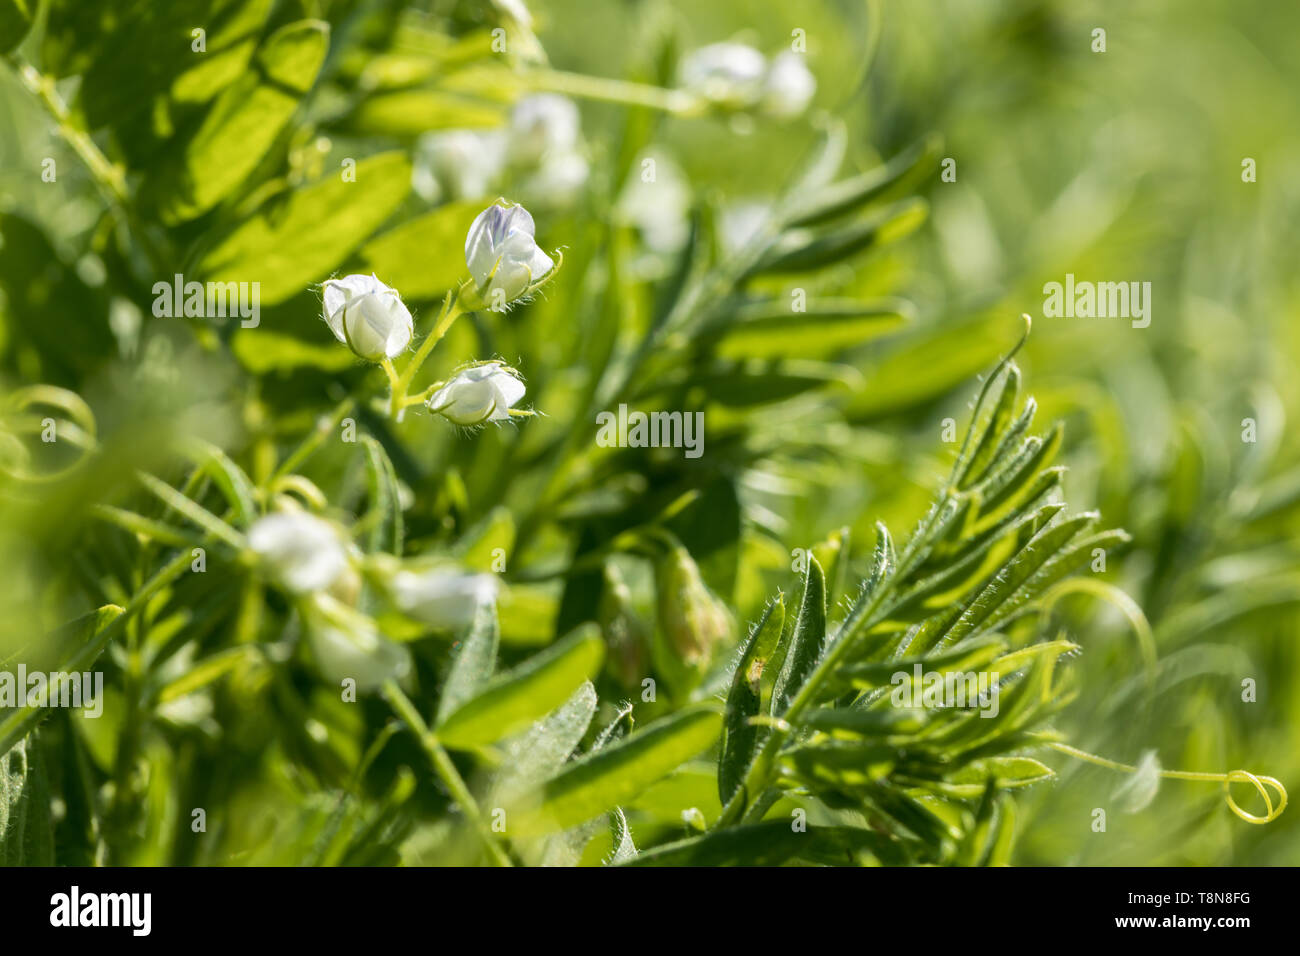 Close-up of lentil plant with white flowers. Lentil field. Detail of flowers and tendrils on a green background Stock Photo